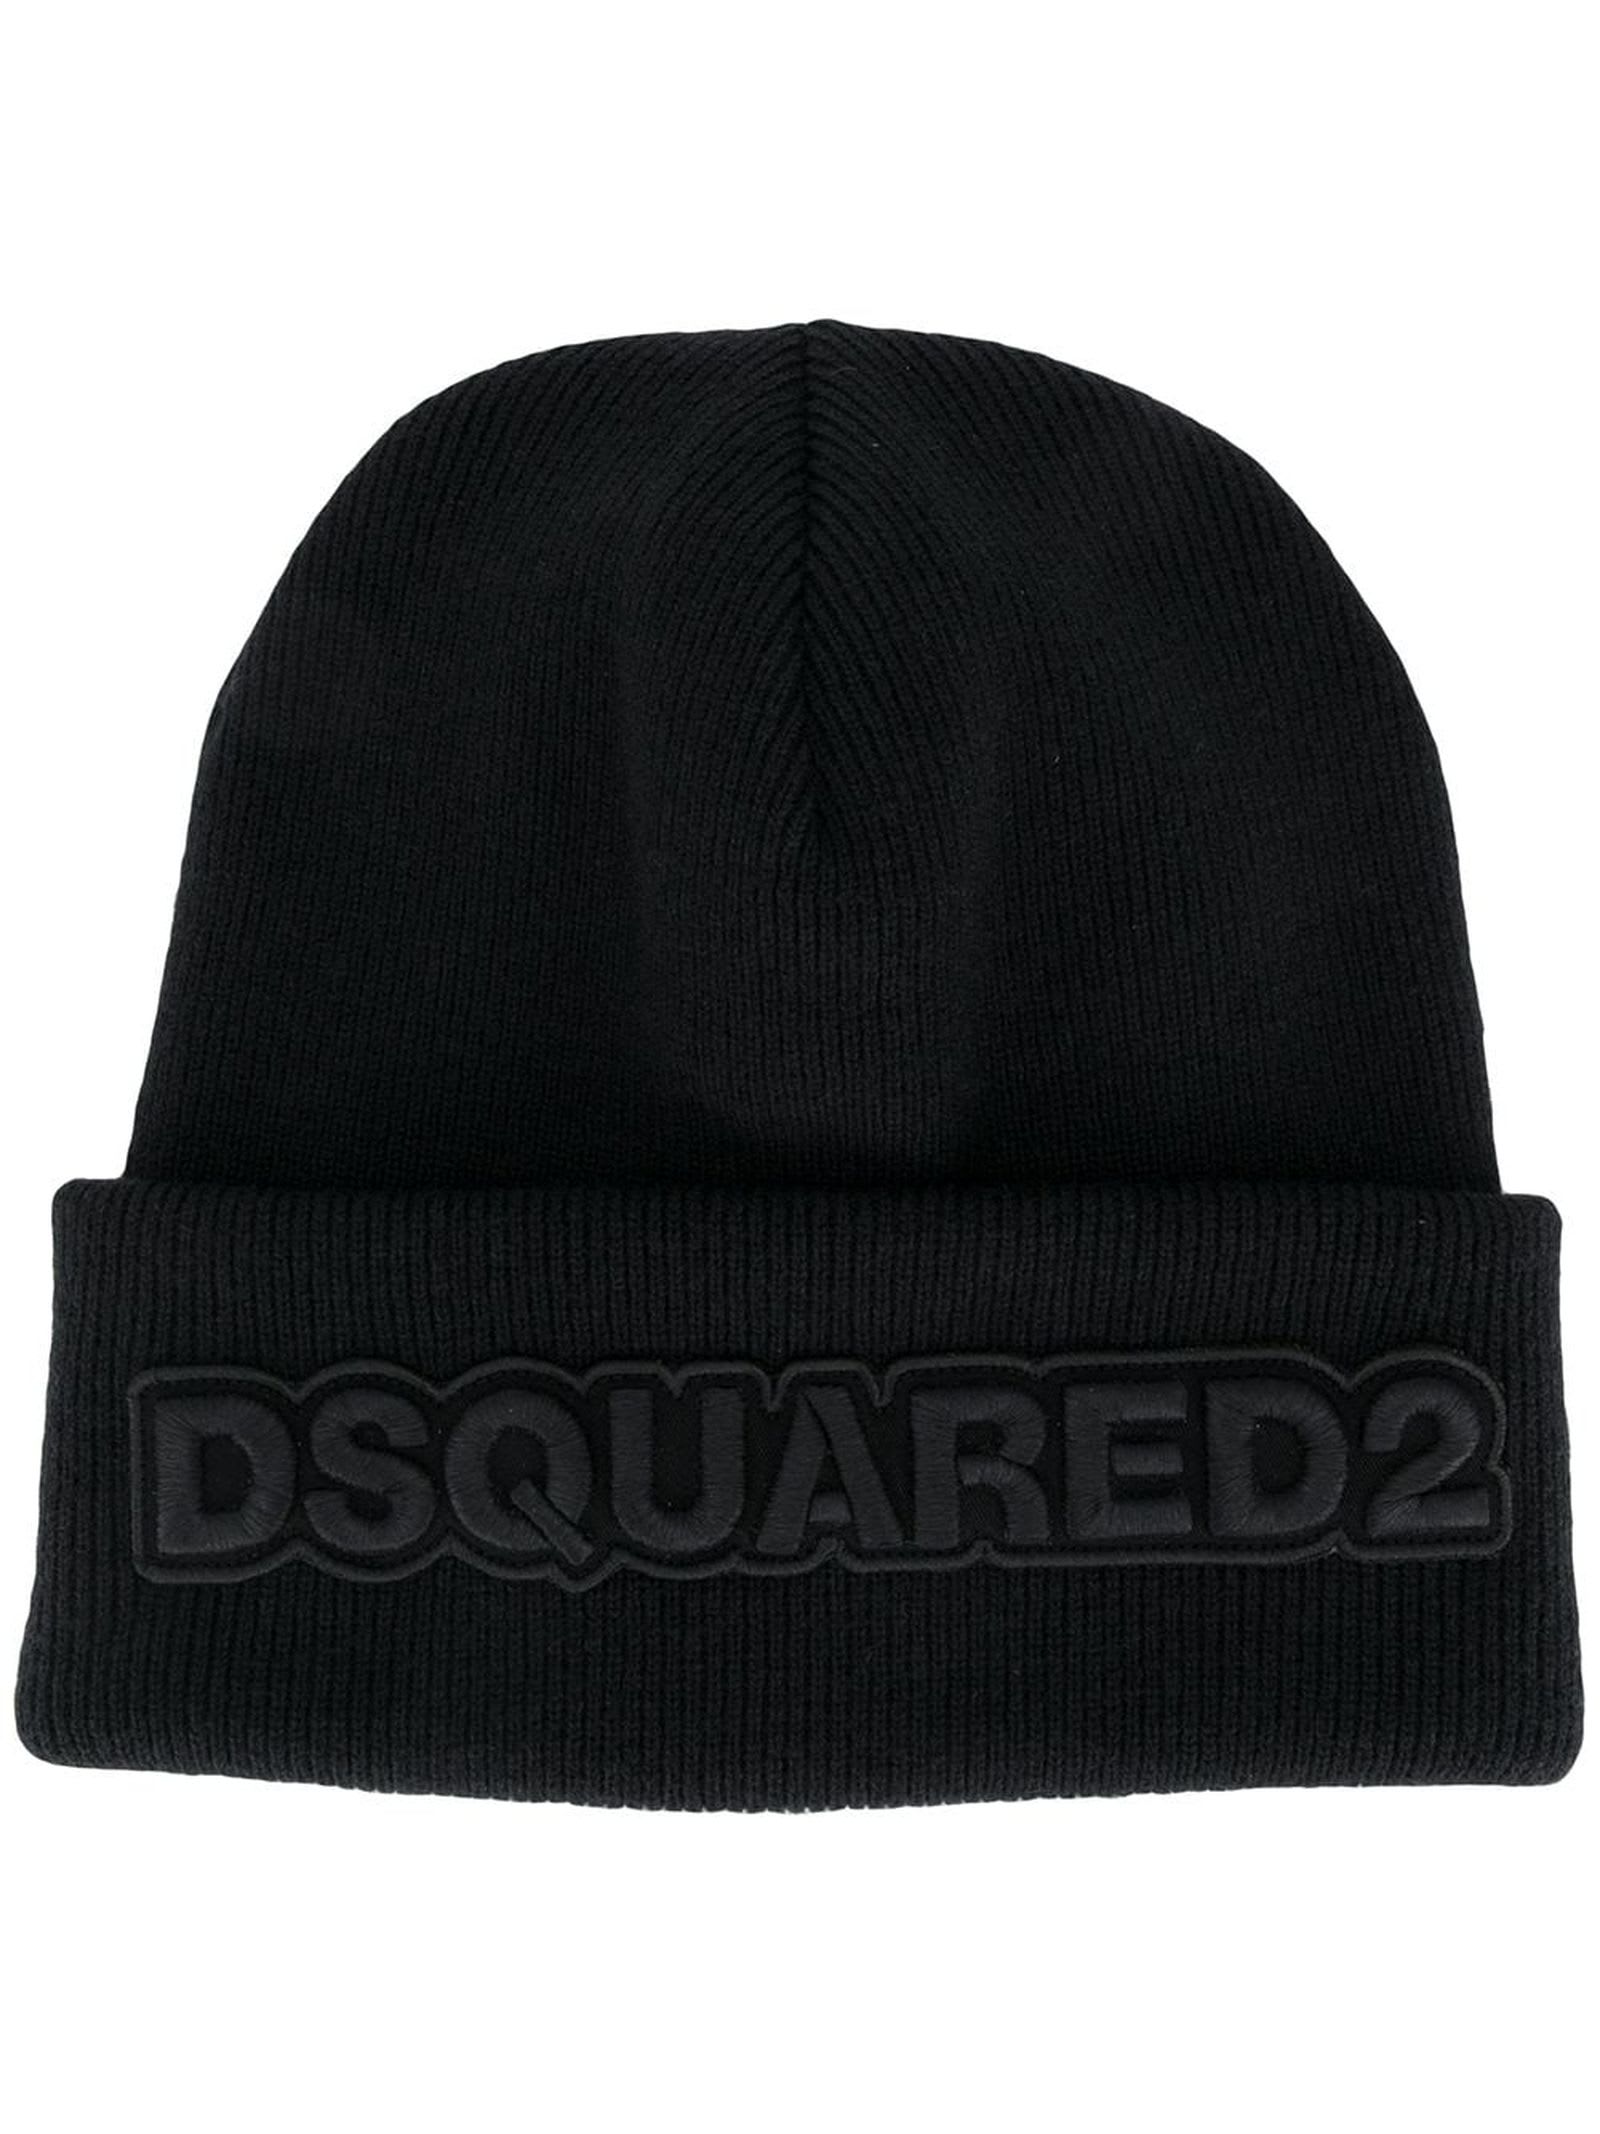 Dsquared2 Black Wool Embroidered Logo Beanie